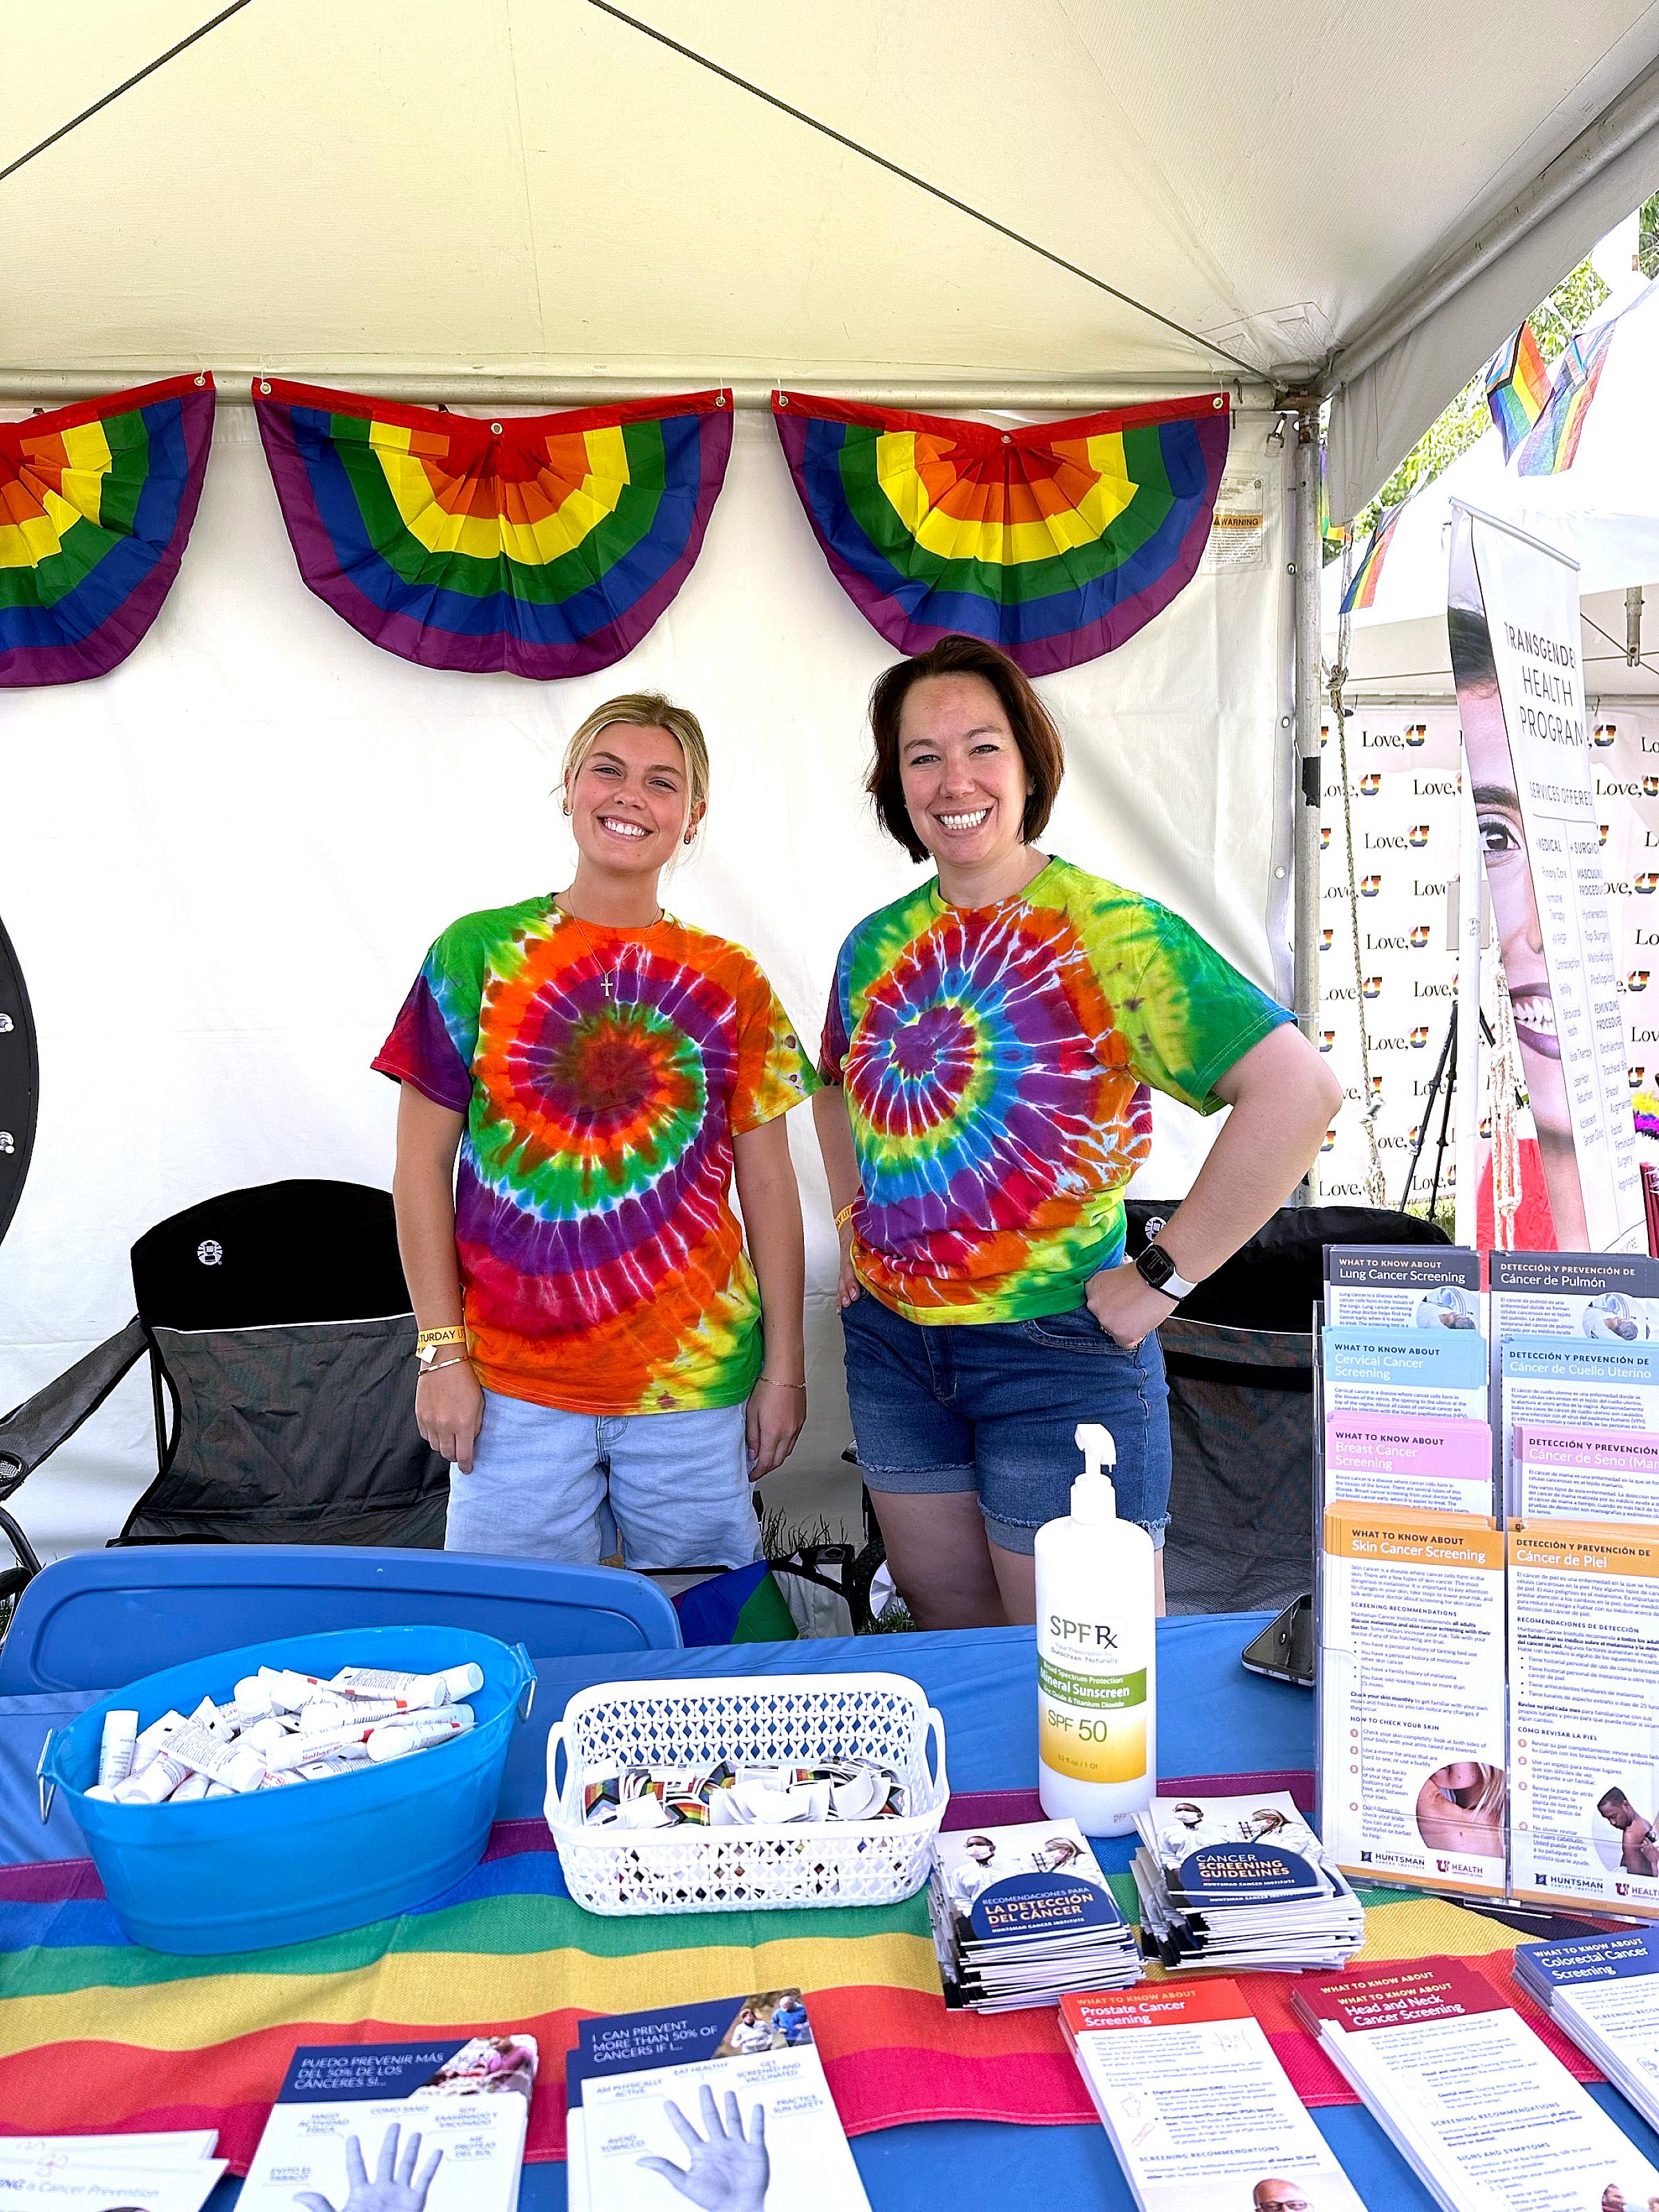 Earlier this month, Huntsman Cancer Institute team members attended the Utah Pride Festival and Parade where they distributed sunscreen and information on sun safety and other ways to prevent cancer. 